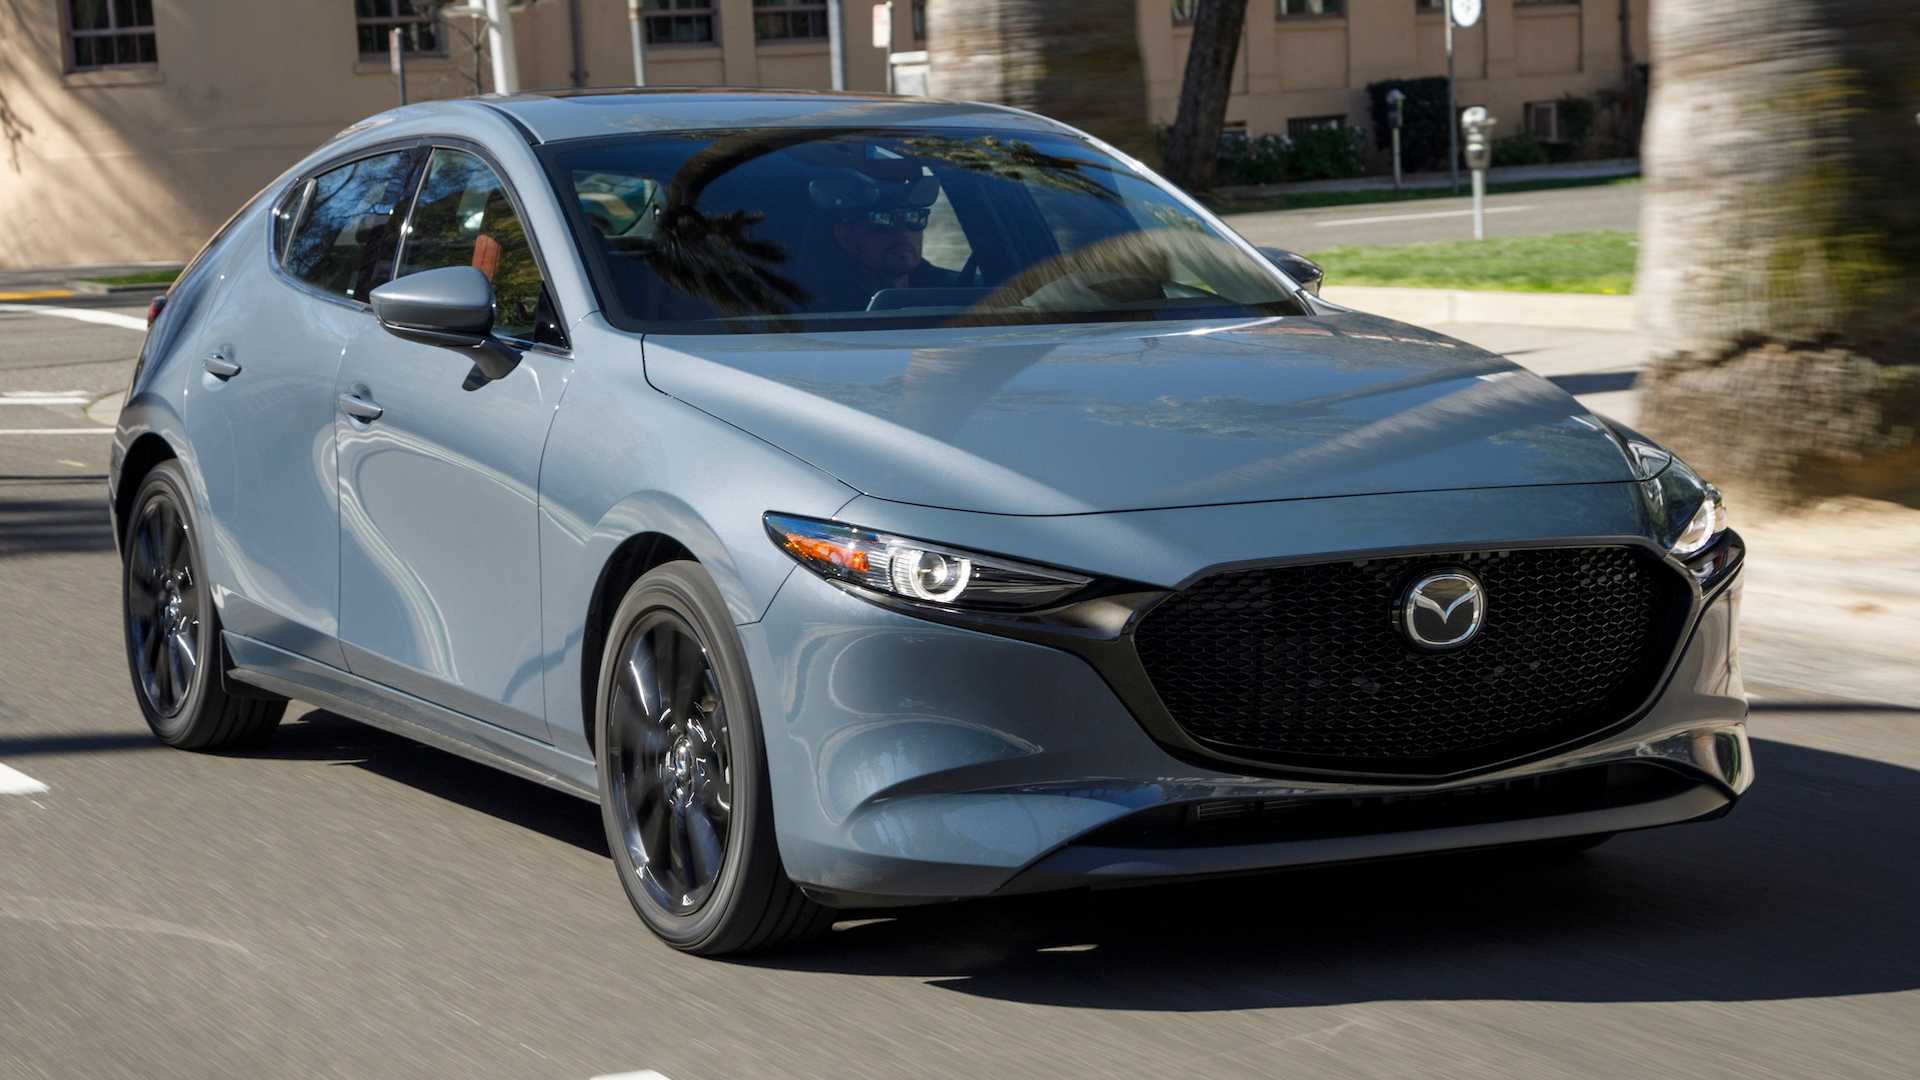 2021 Mazda 3 25 Turbo Hatchback Review Big Heart Could Use More Soul